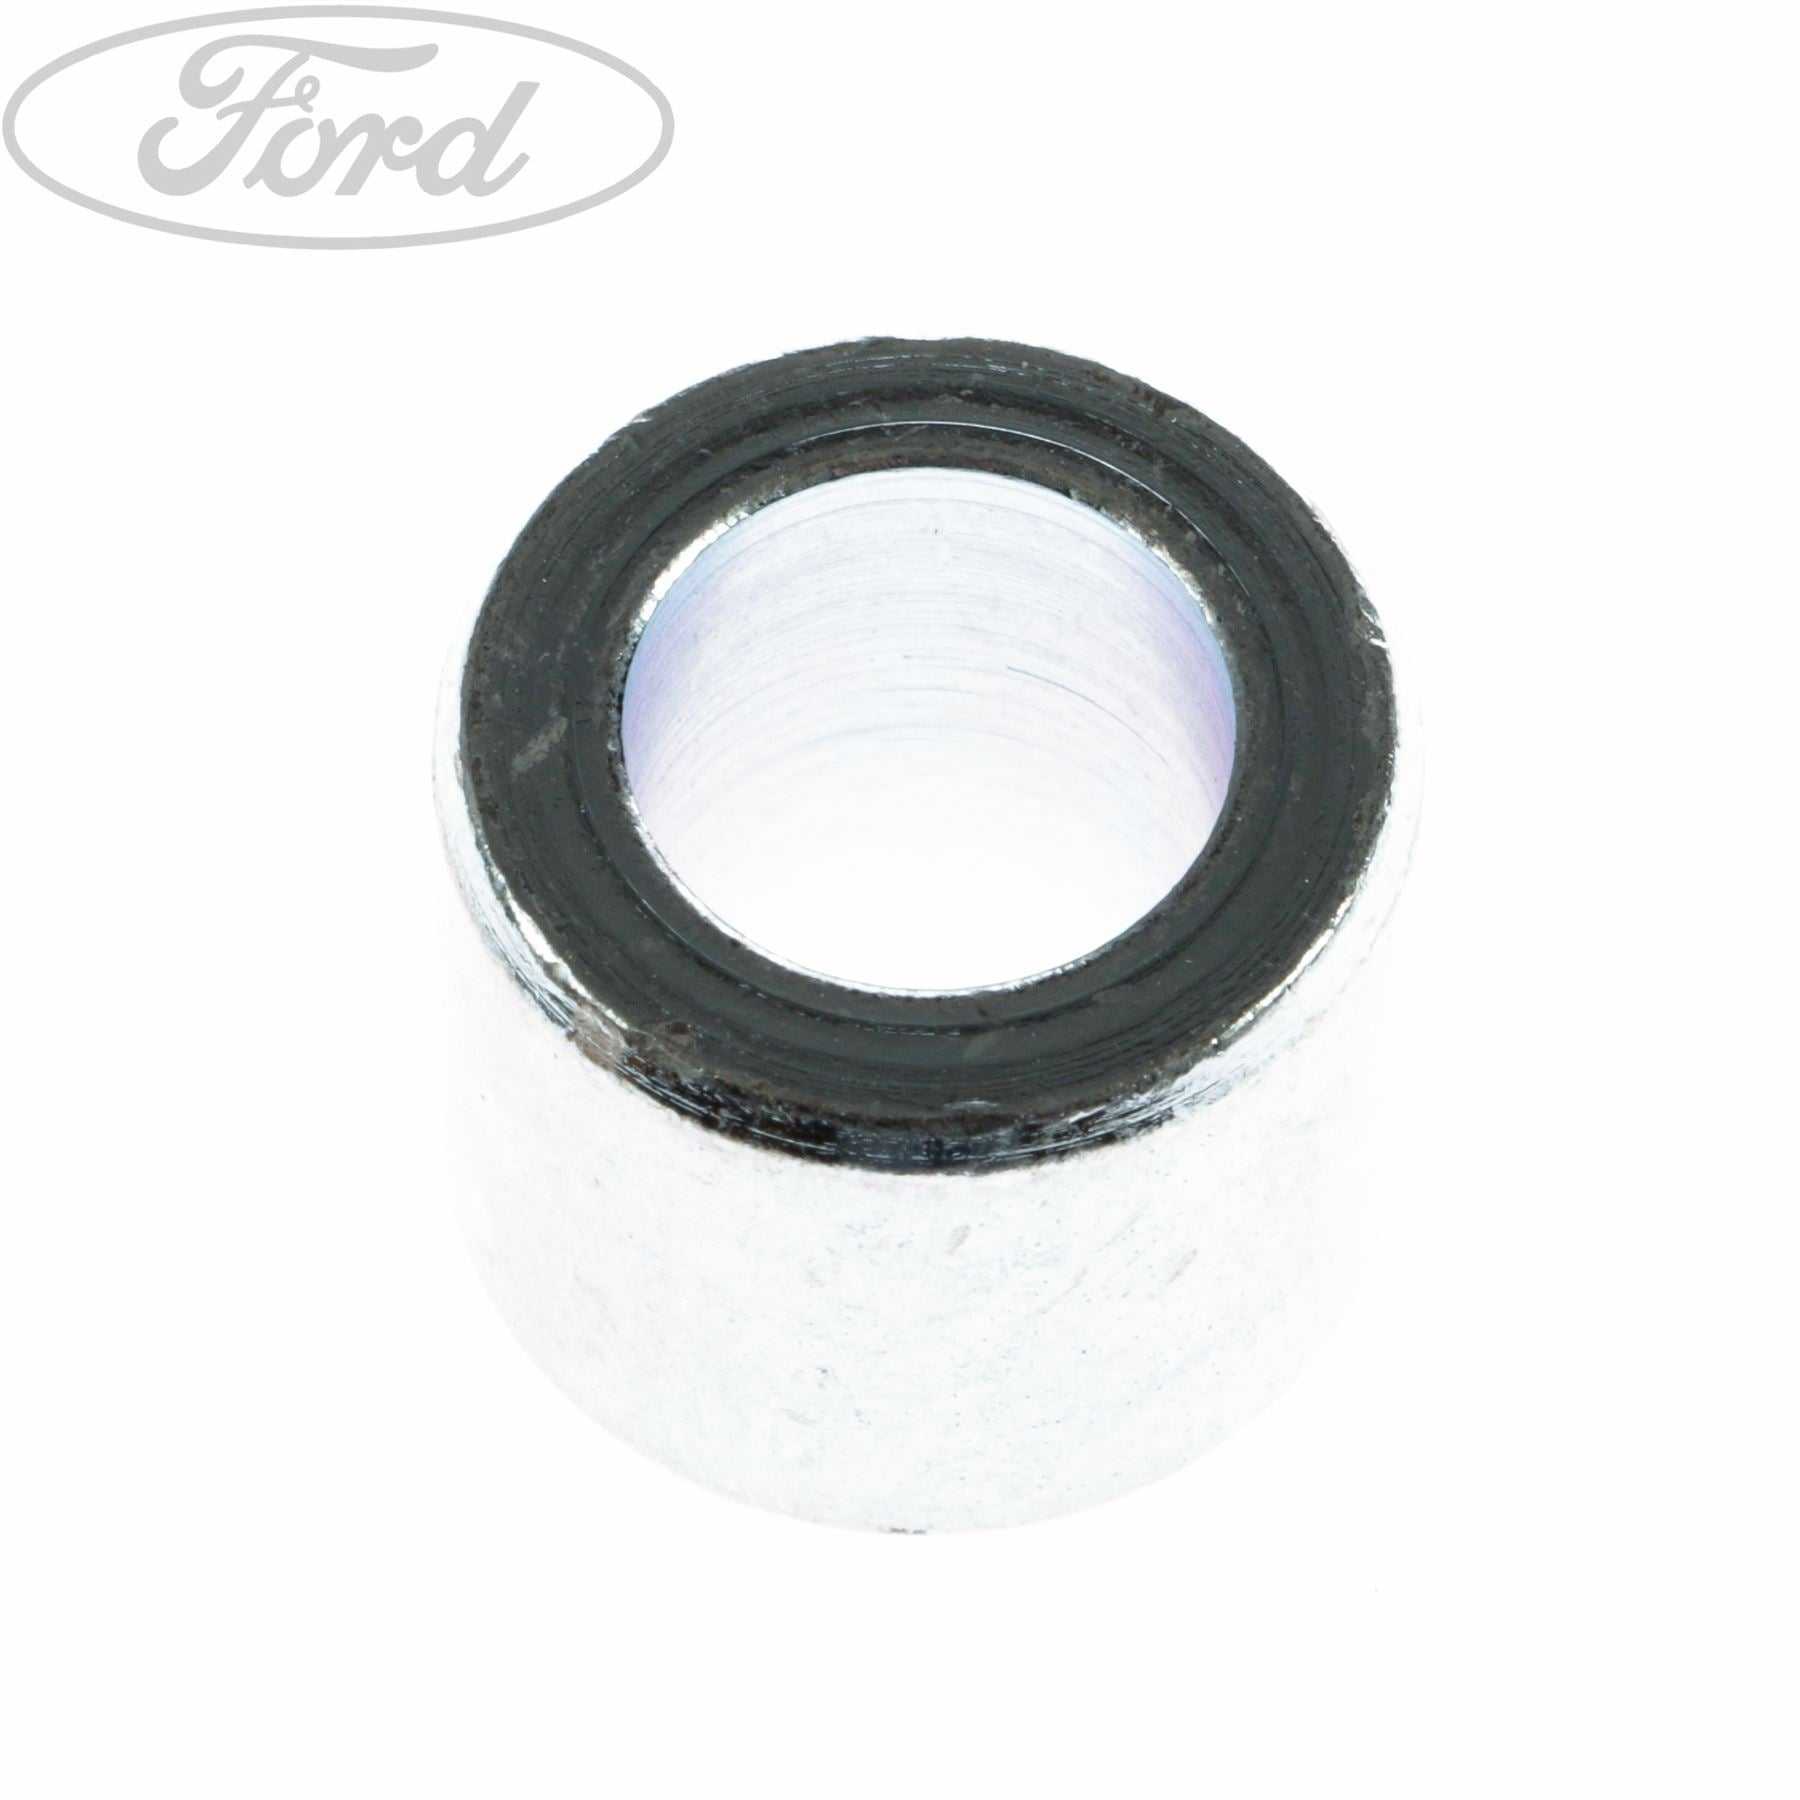 Ford, TRANSIT 6 SPEED AUTO GEARBOX CASE MOUNTING BUSH 24MM